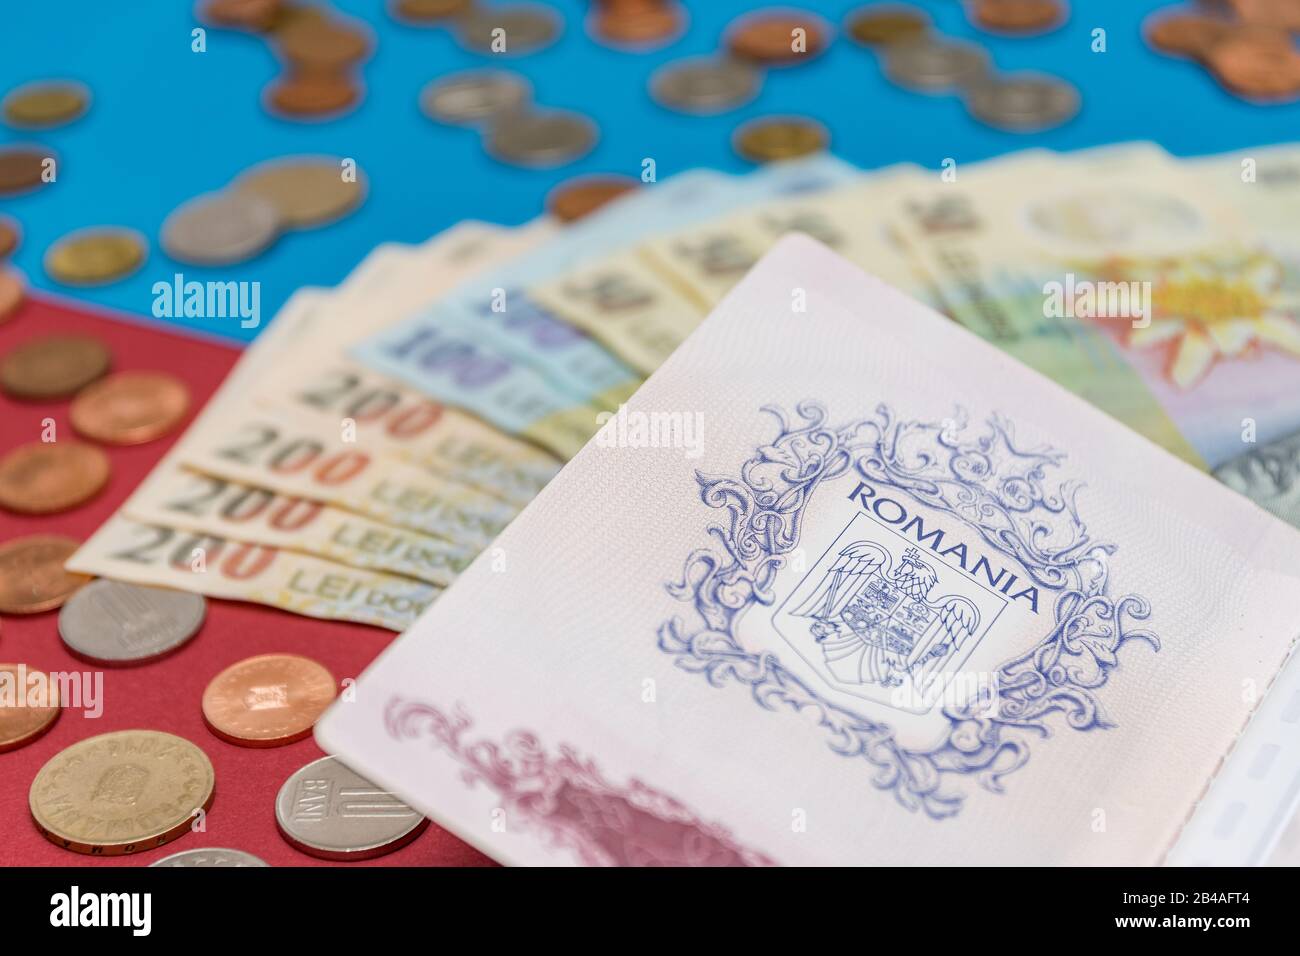 Romanian concept. The Romanian passport and Romanian banknotes/coins on a blue and red background. Coloseup of Romanian Passport and Romanian currency Stock Photo